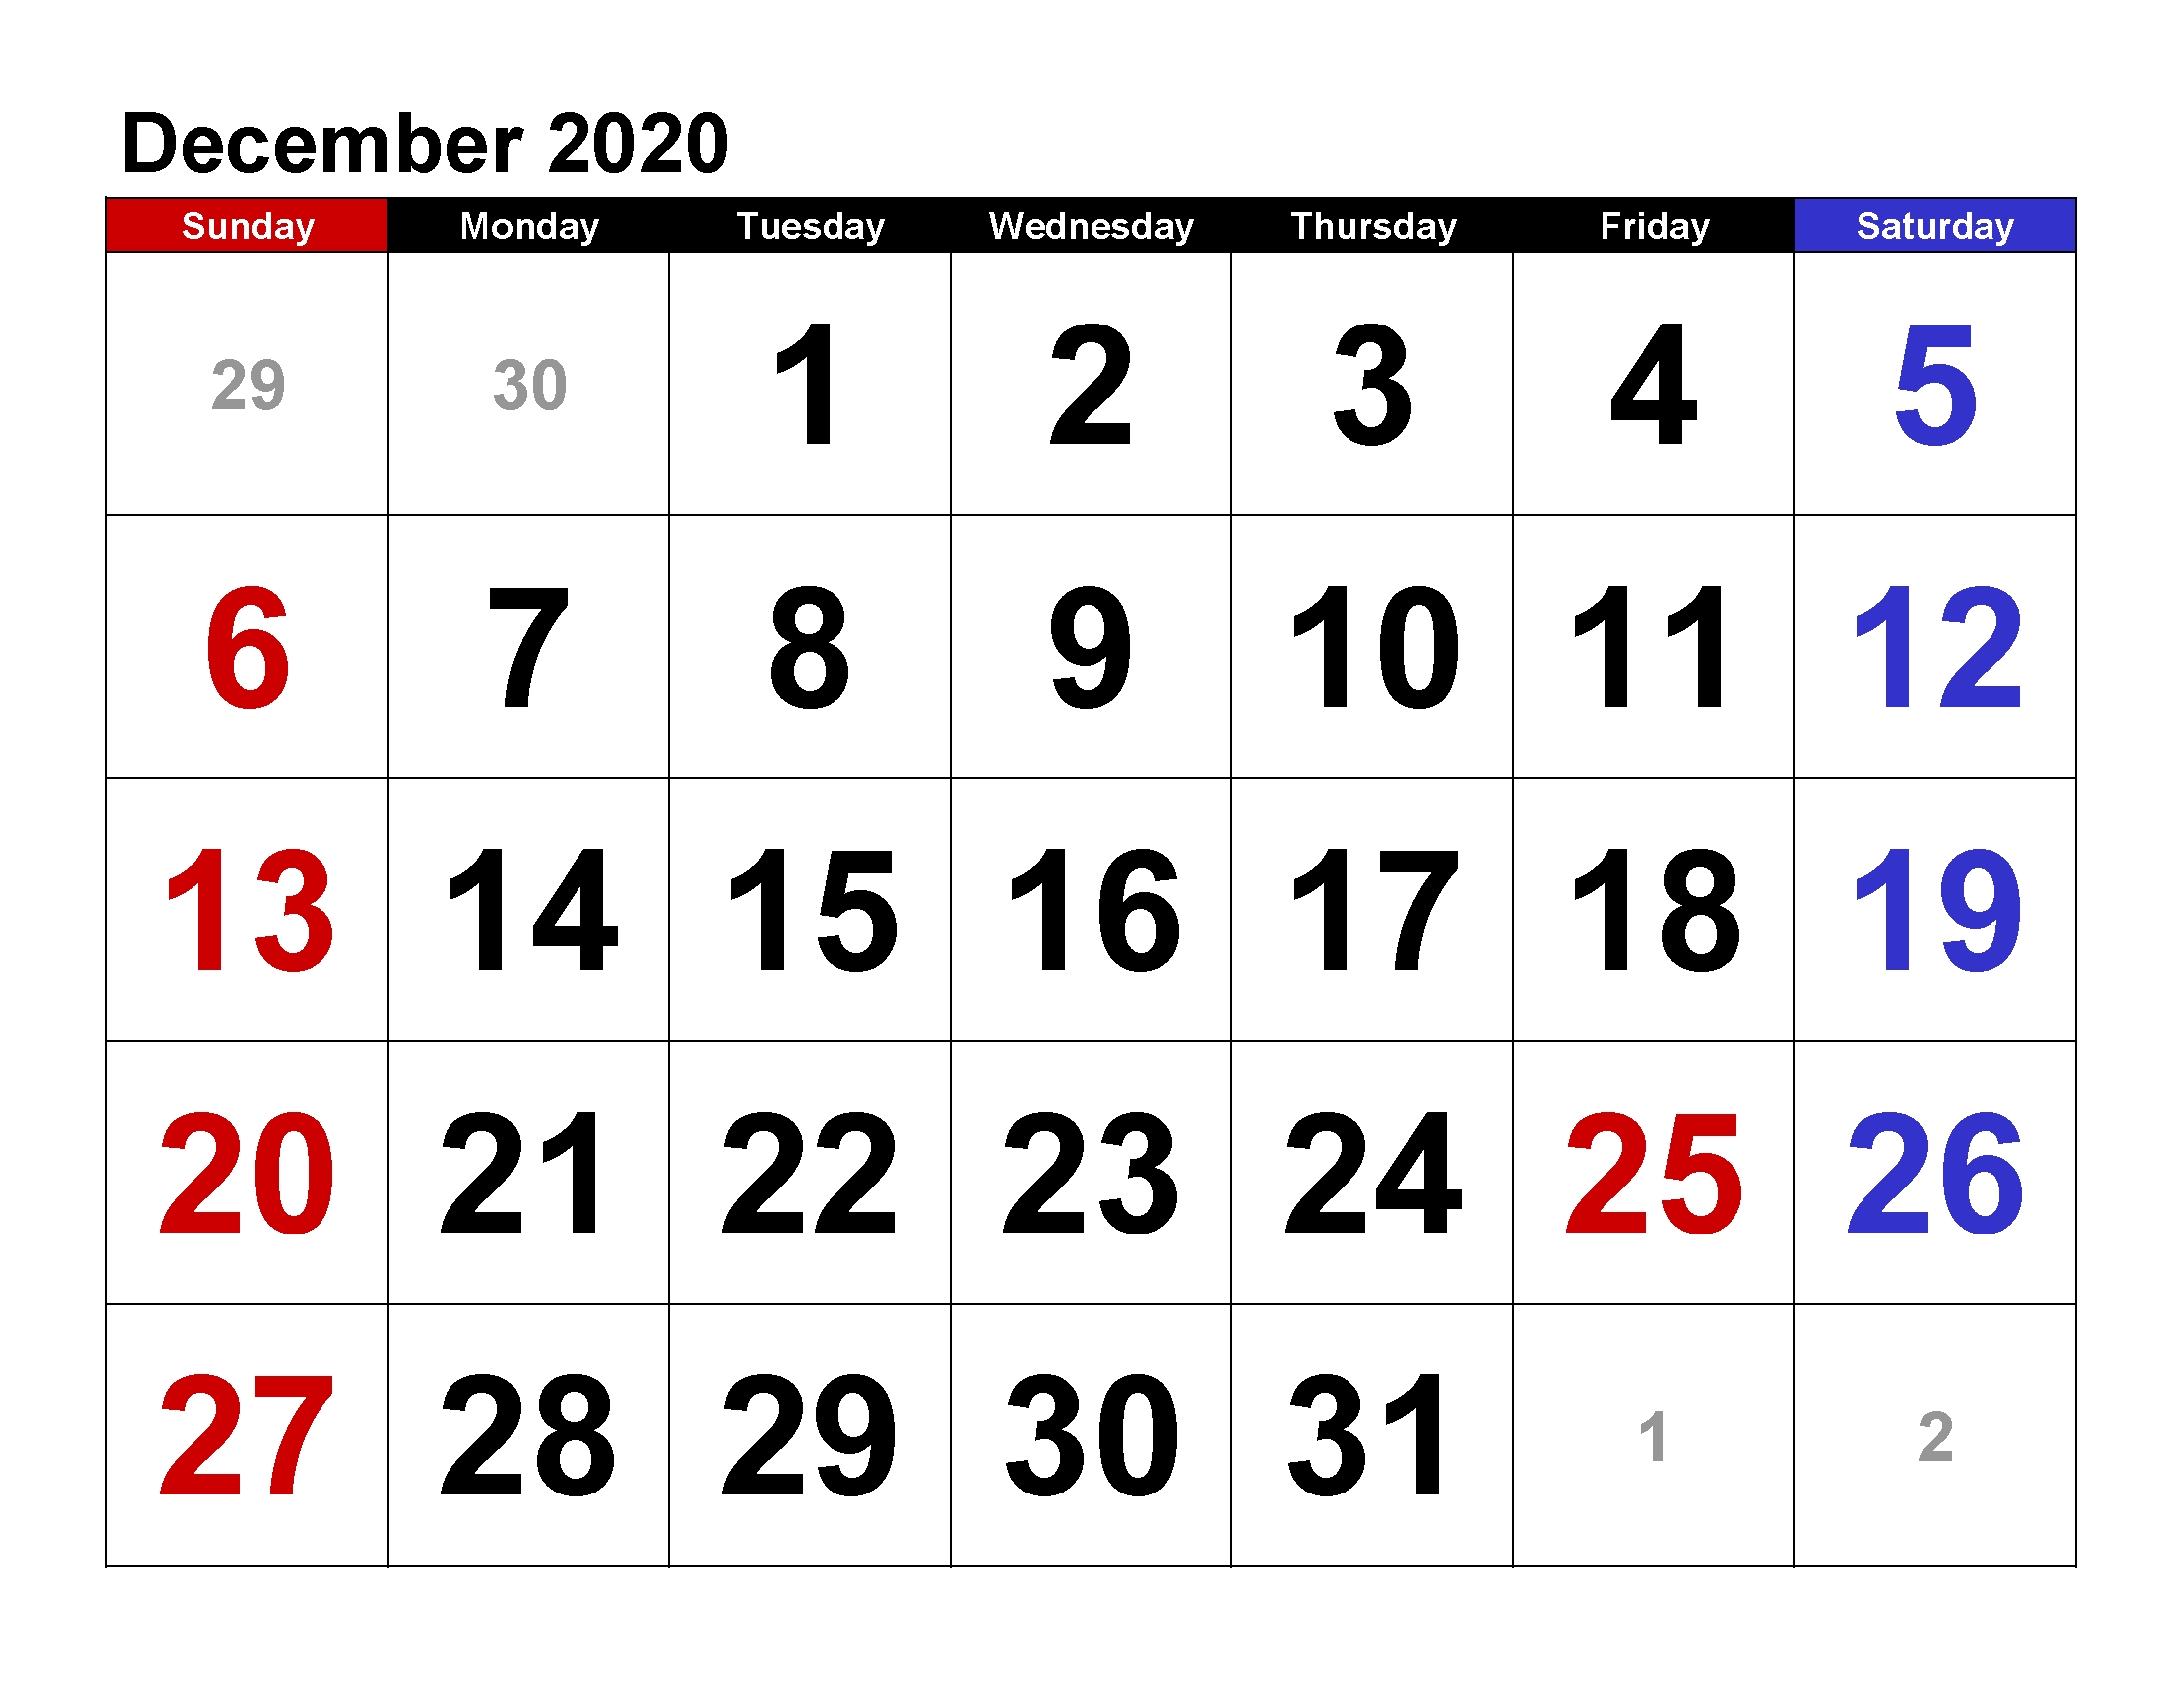 Printable Calendar Template December 2020 Calendar Large-Where Do They Have Calendars With Large Numbers